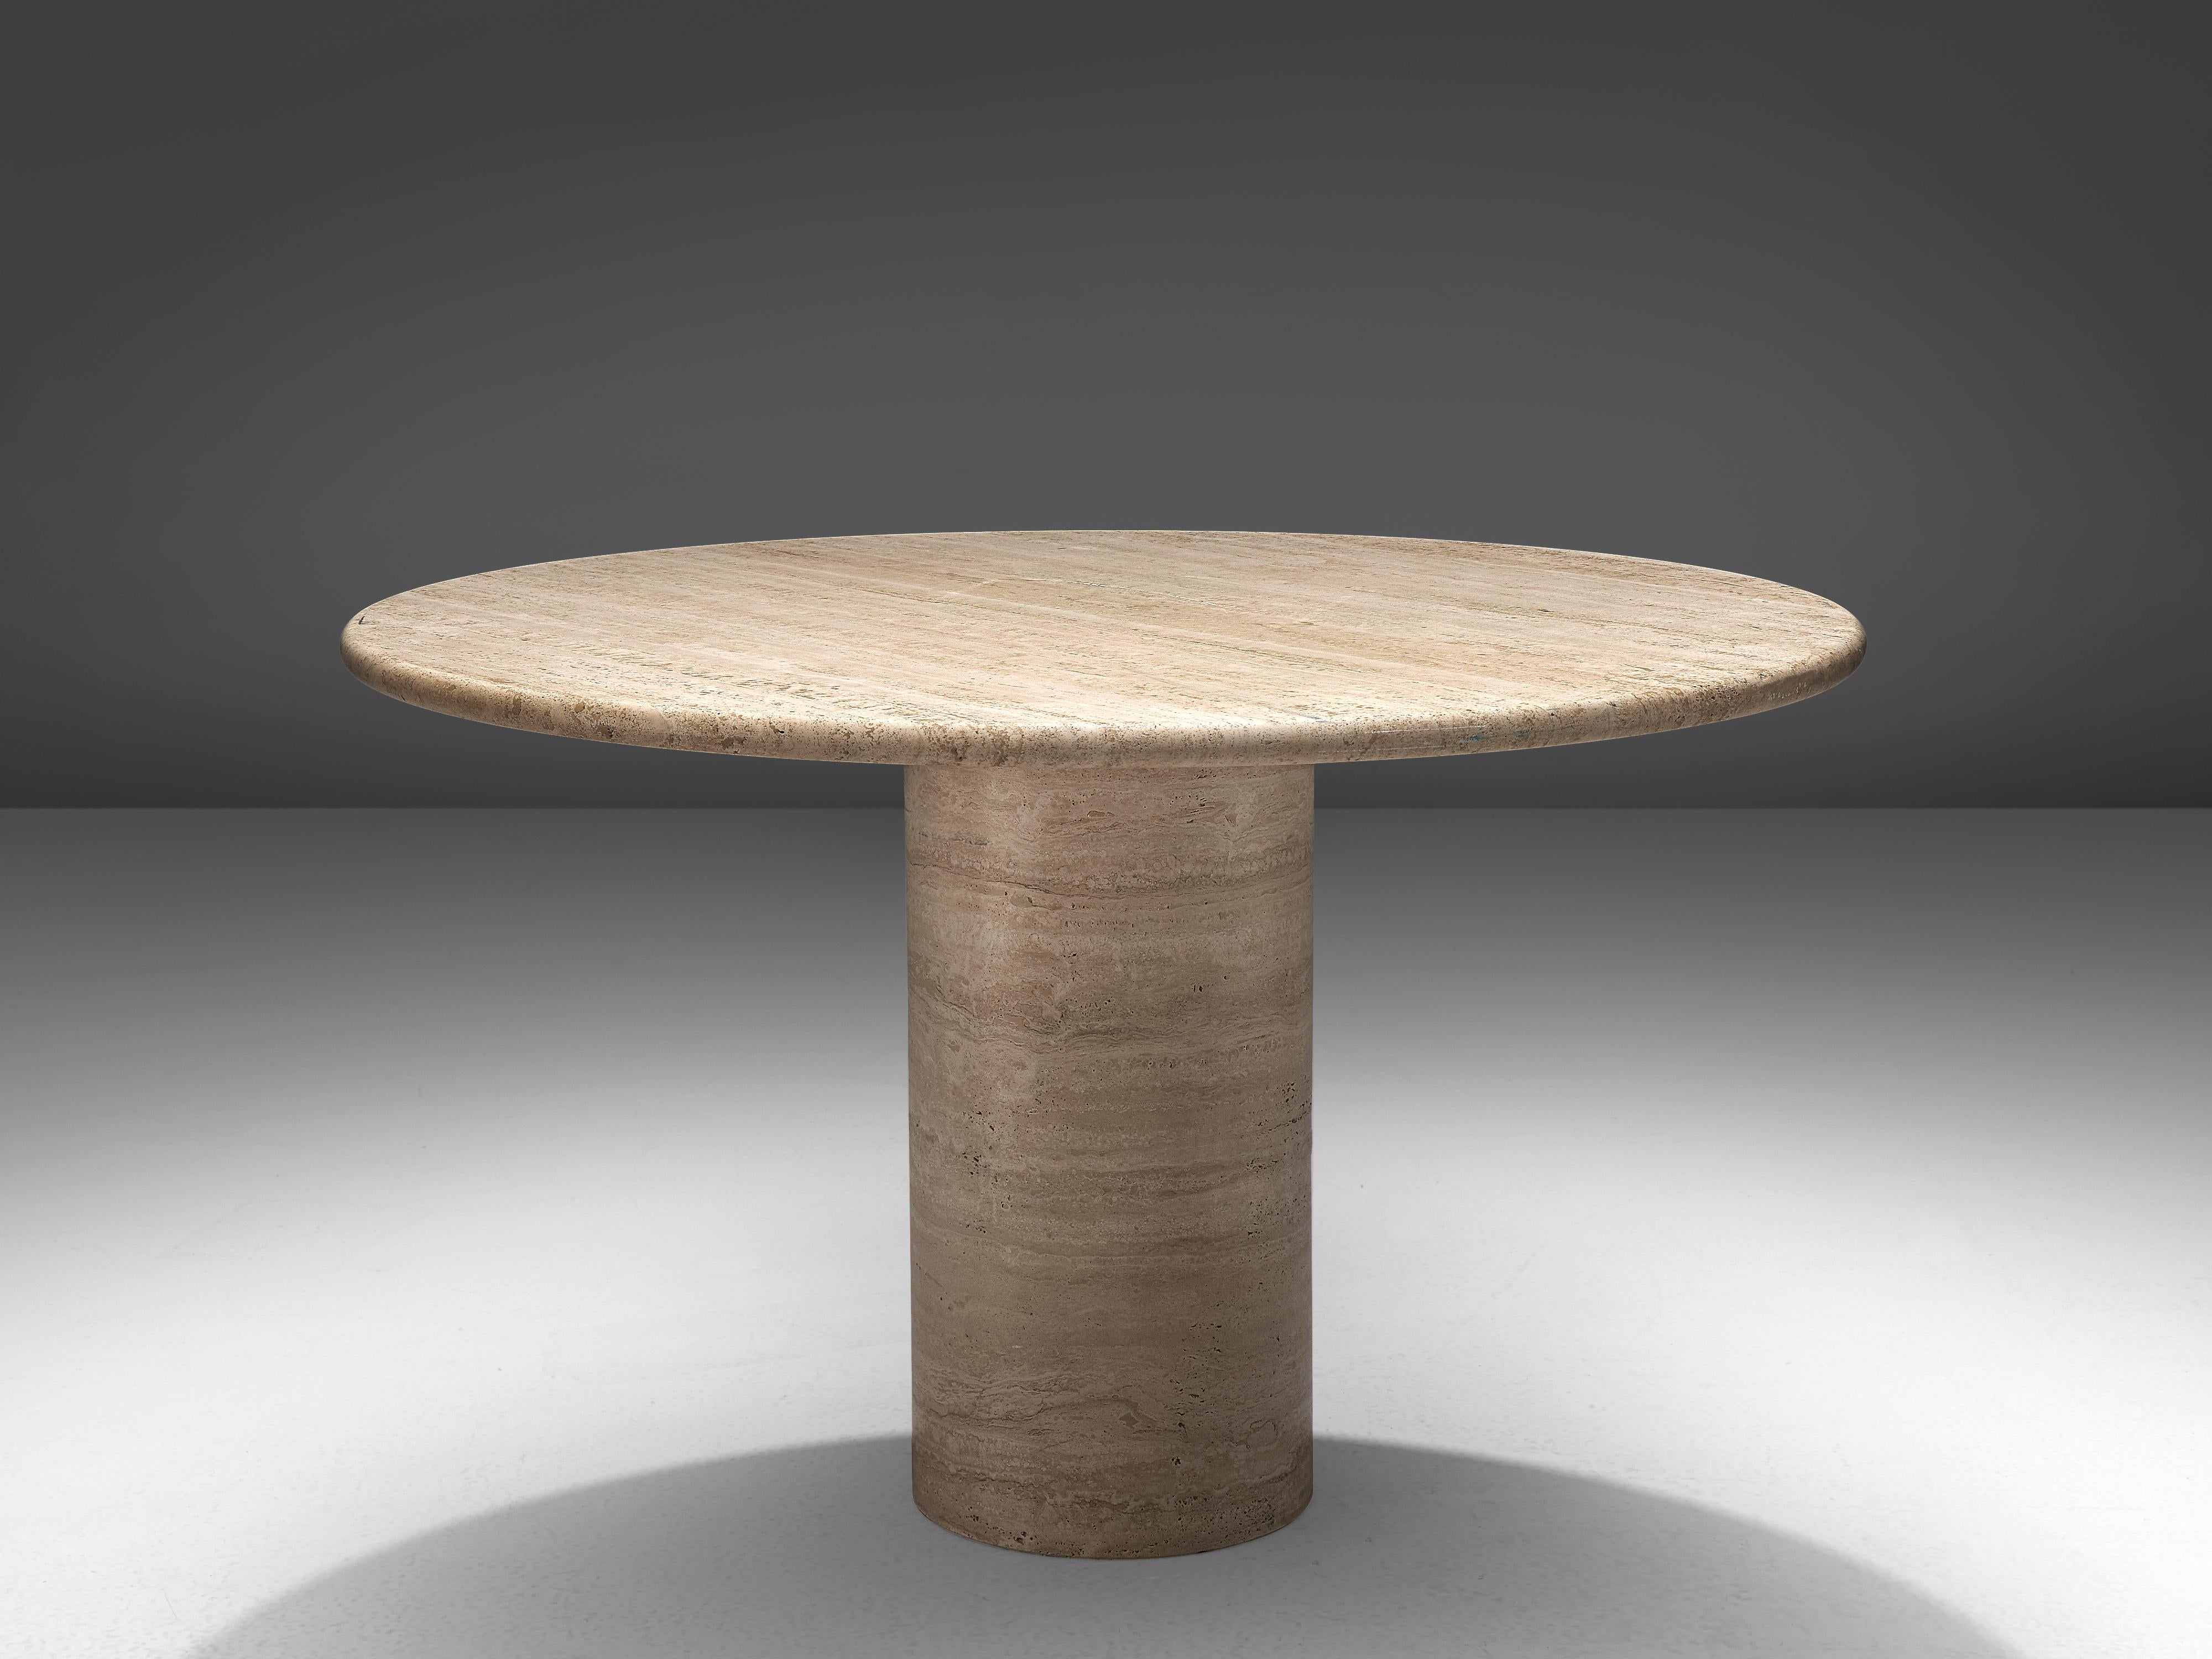 Dining table, travertine, Europe, 1970s

This solid dining table features a colon, cylindrically shaped foot and a thick circular travertine tabletop. The aesthetics are archetypical for postmodern design, bearing references to architectural forms